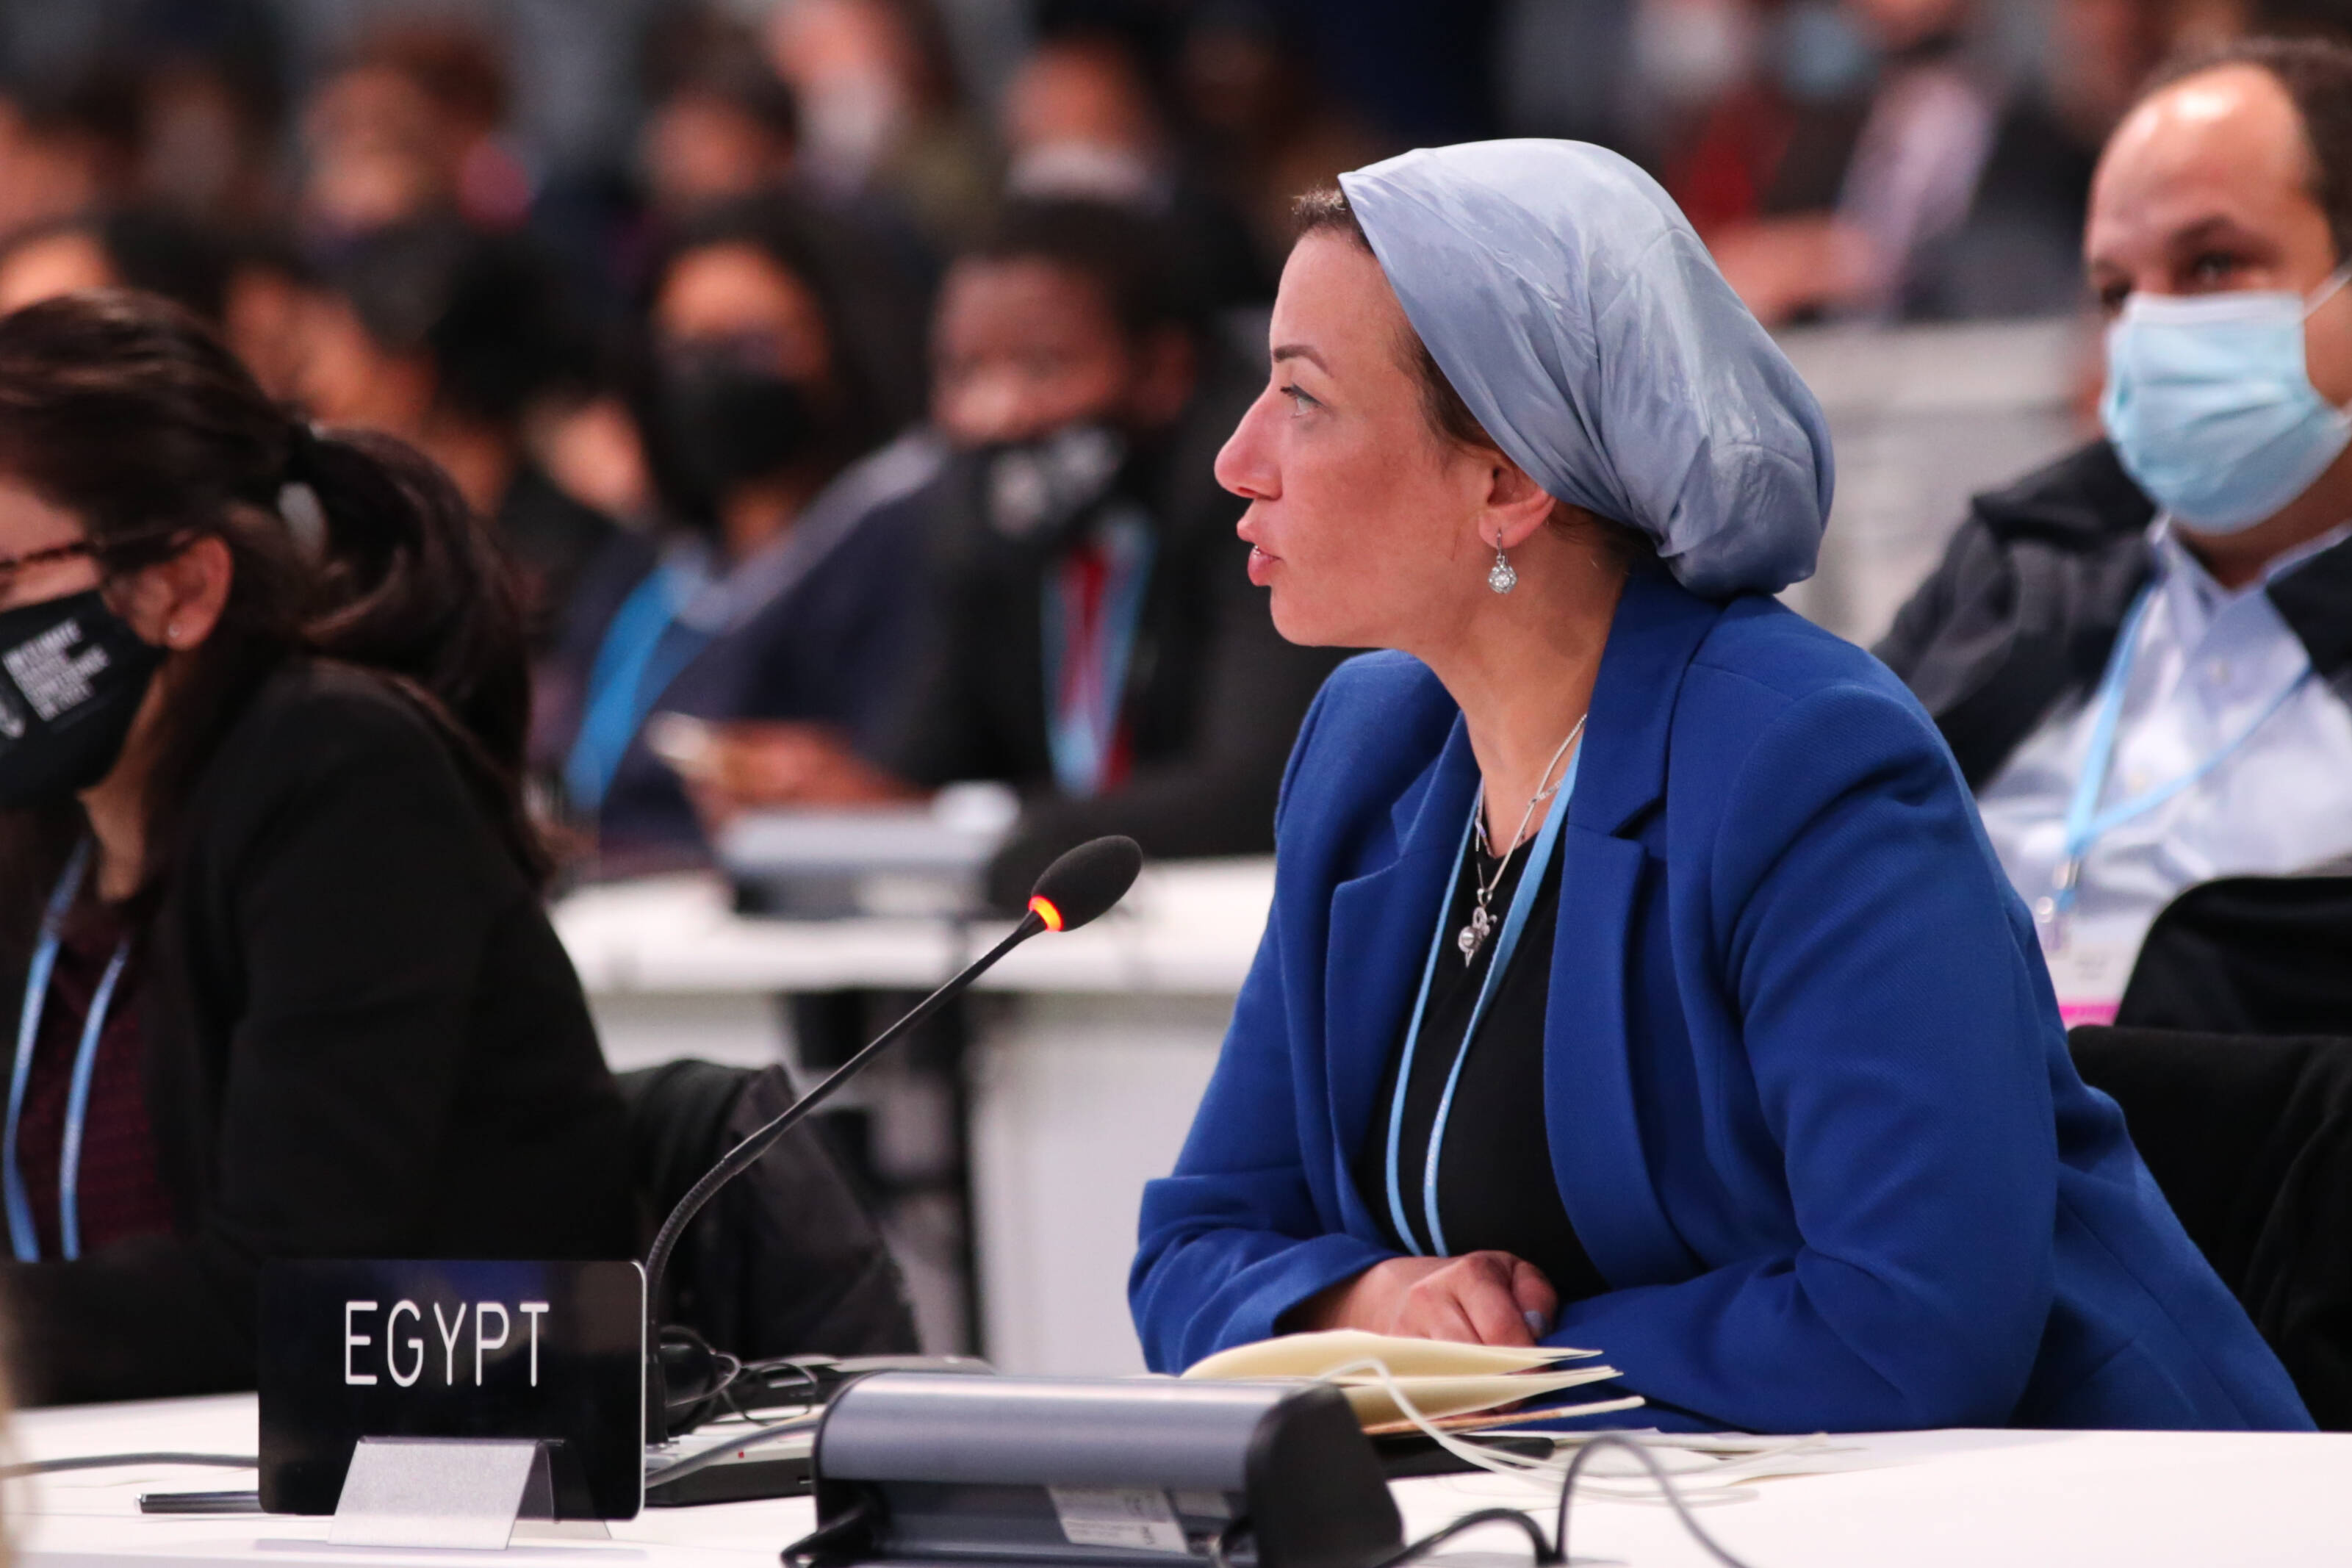 H.E Yasmine Fouad, Egypt's Minister of Environment, at COP26